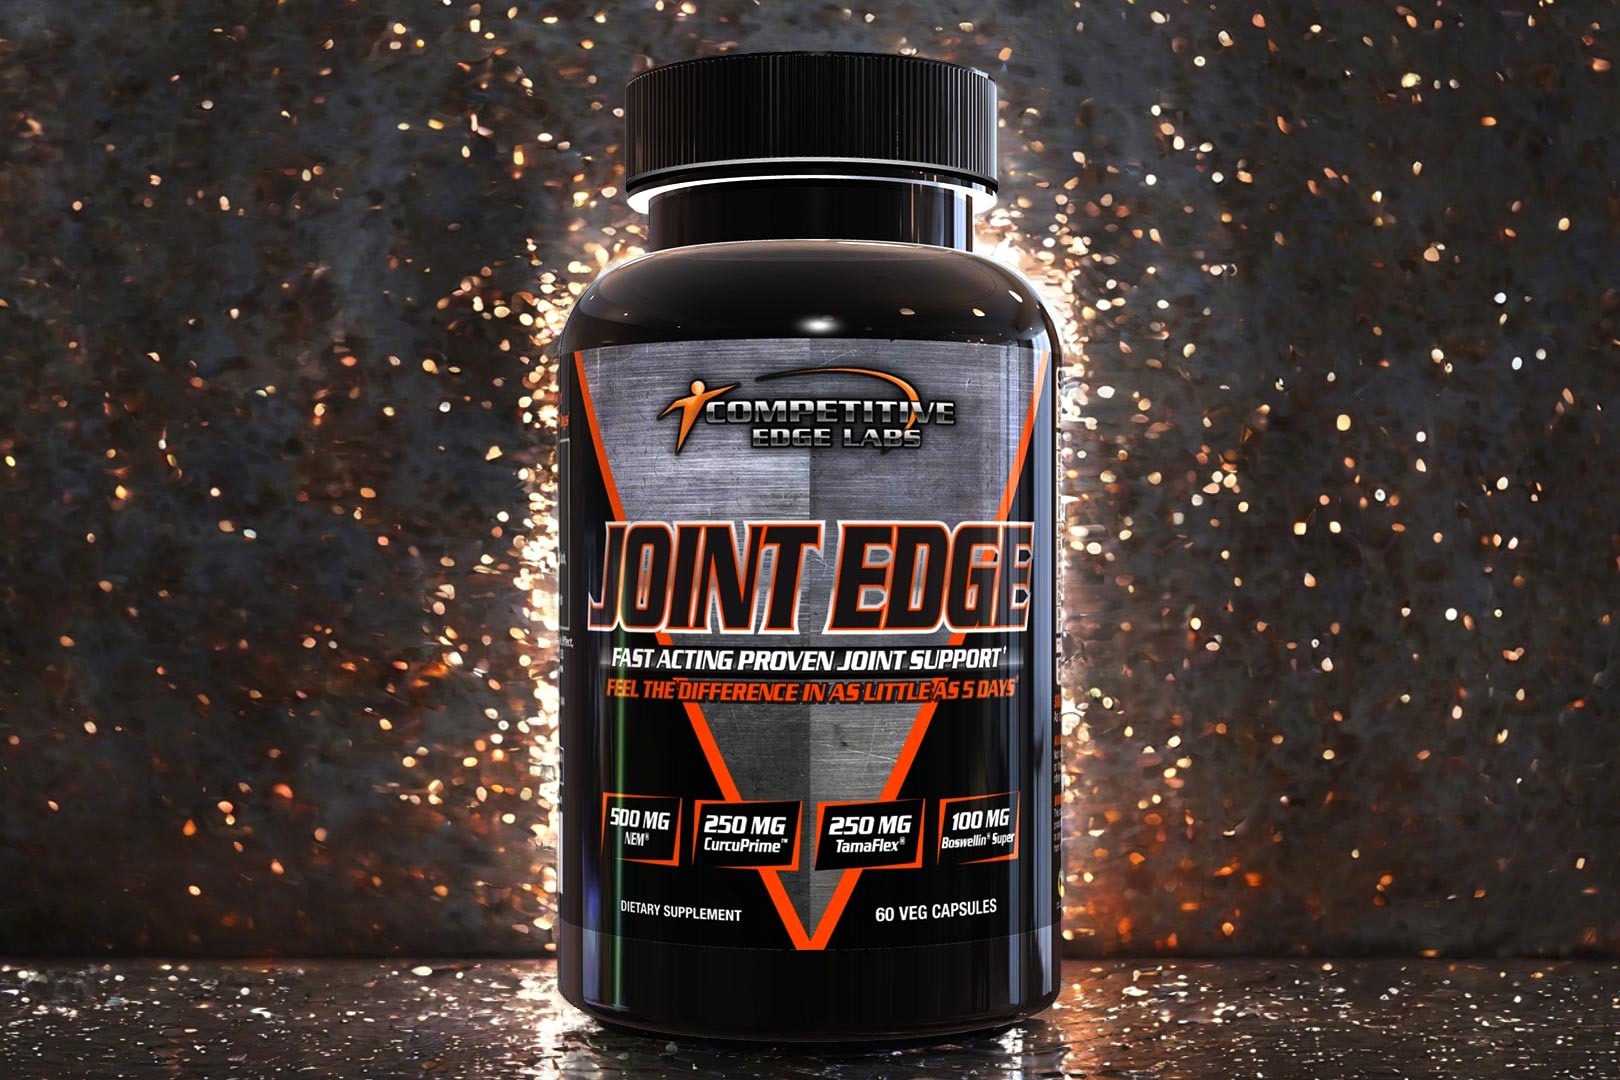 Competitive Edge Labs Joint Edge